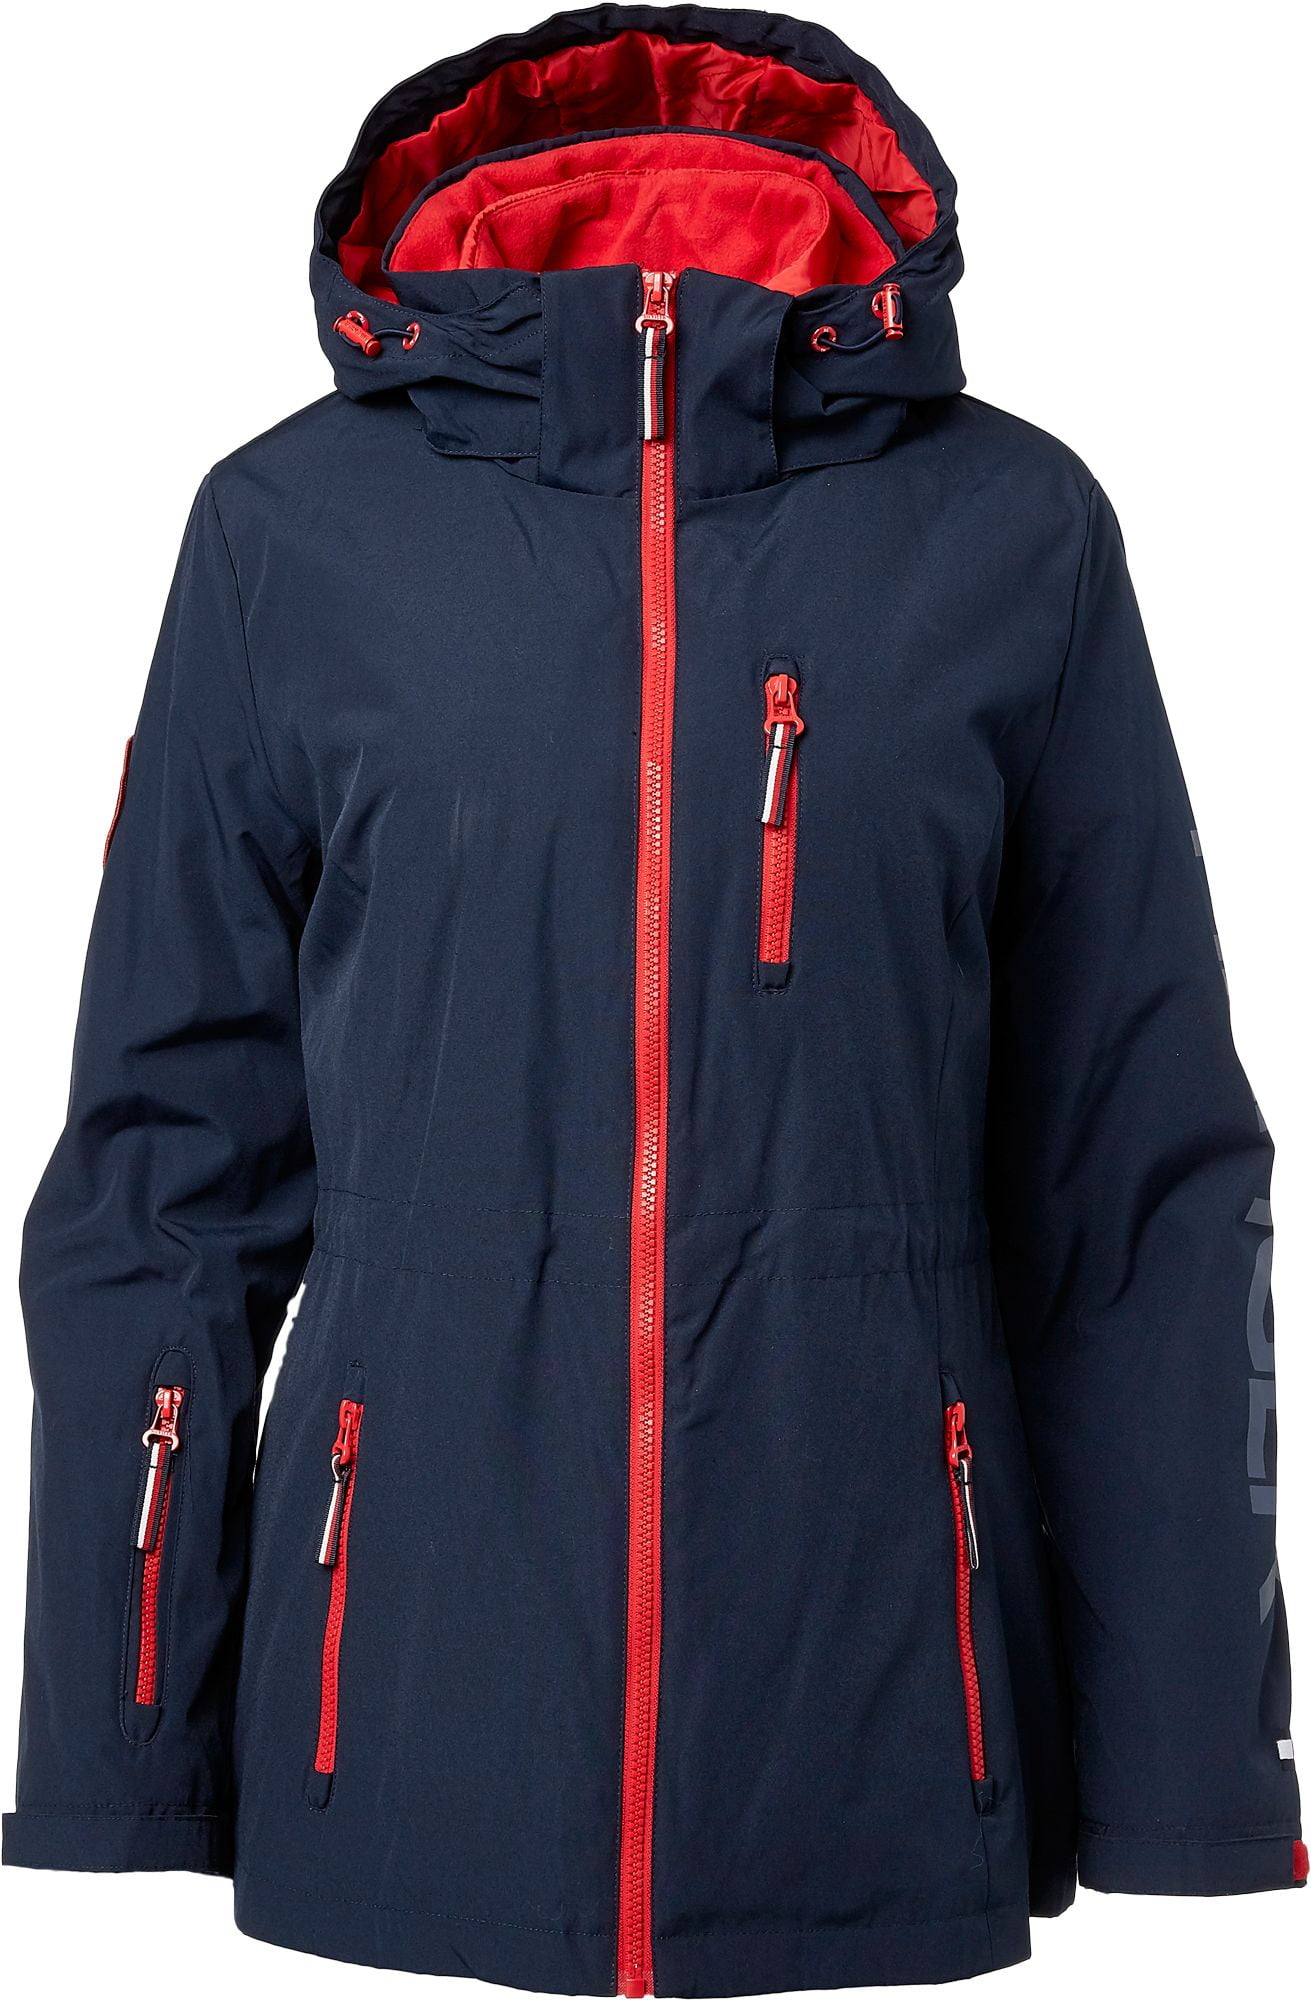 tommy hilfiger 3 in 1 systems jacket women's